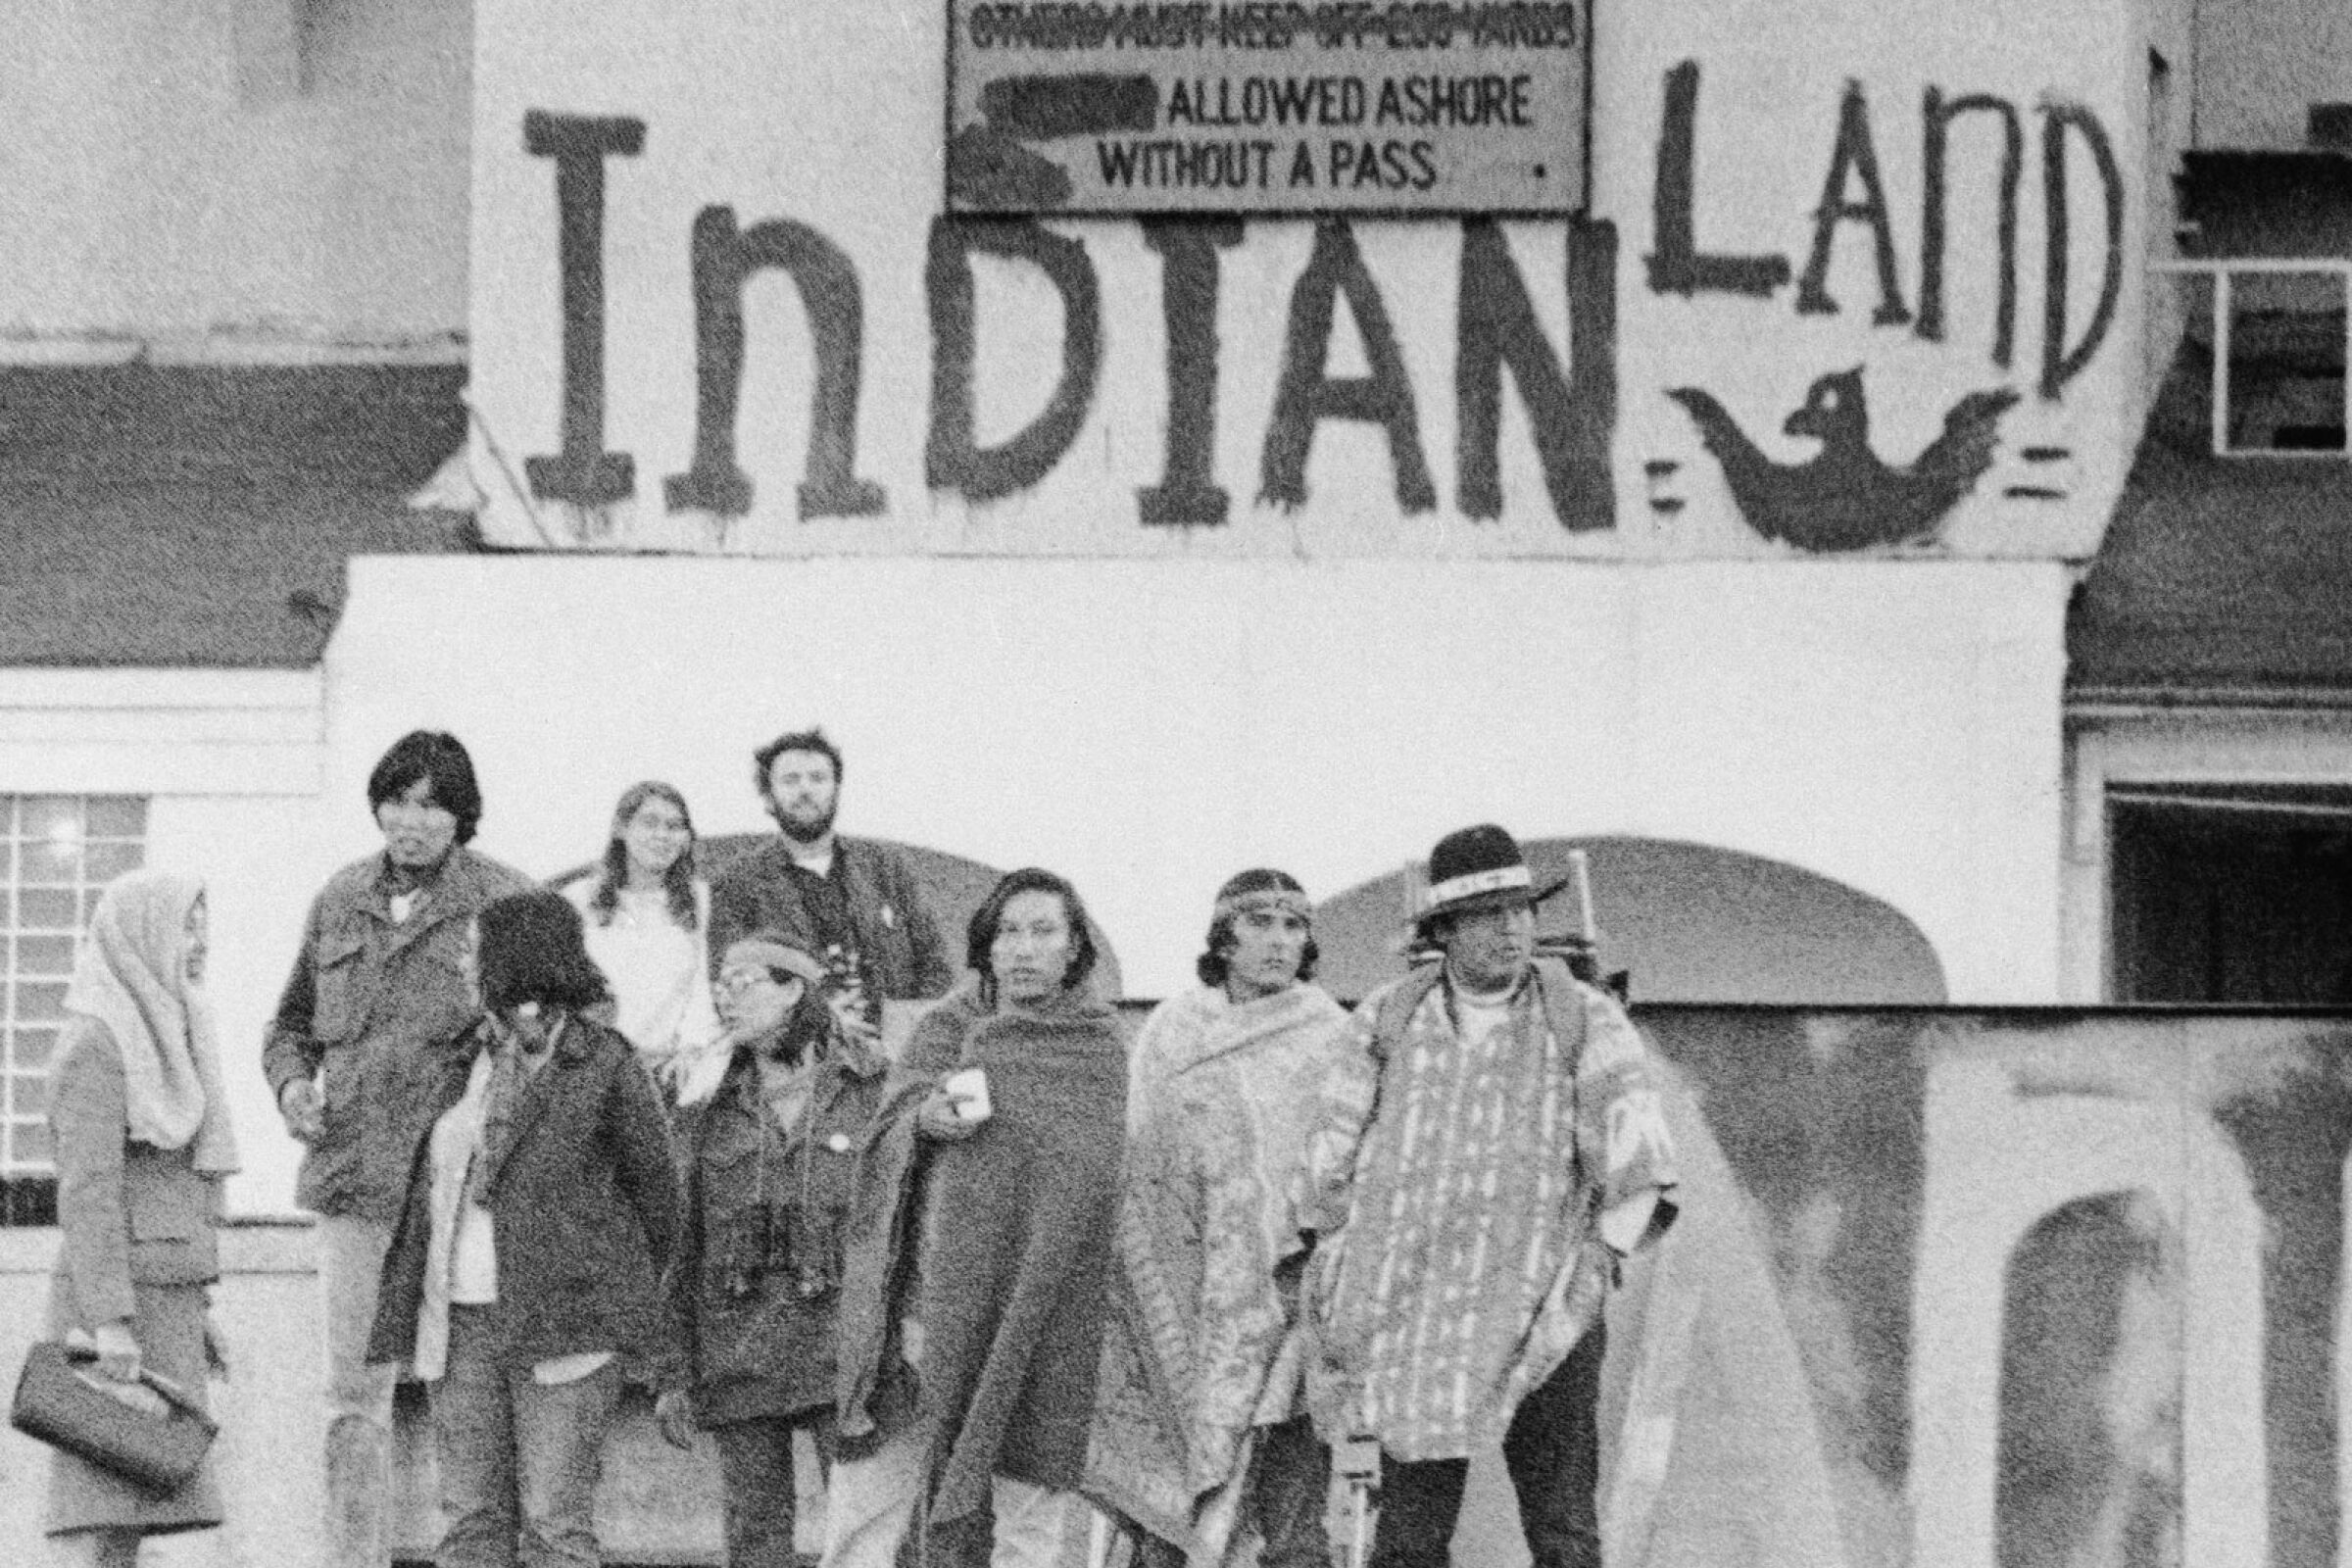 A group of Indigenous people stand on the dock at Alcatraz under signs that read "Indians Welcome" and "Indian Land"